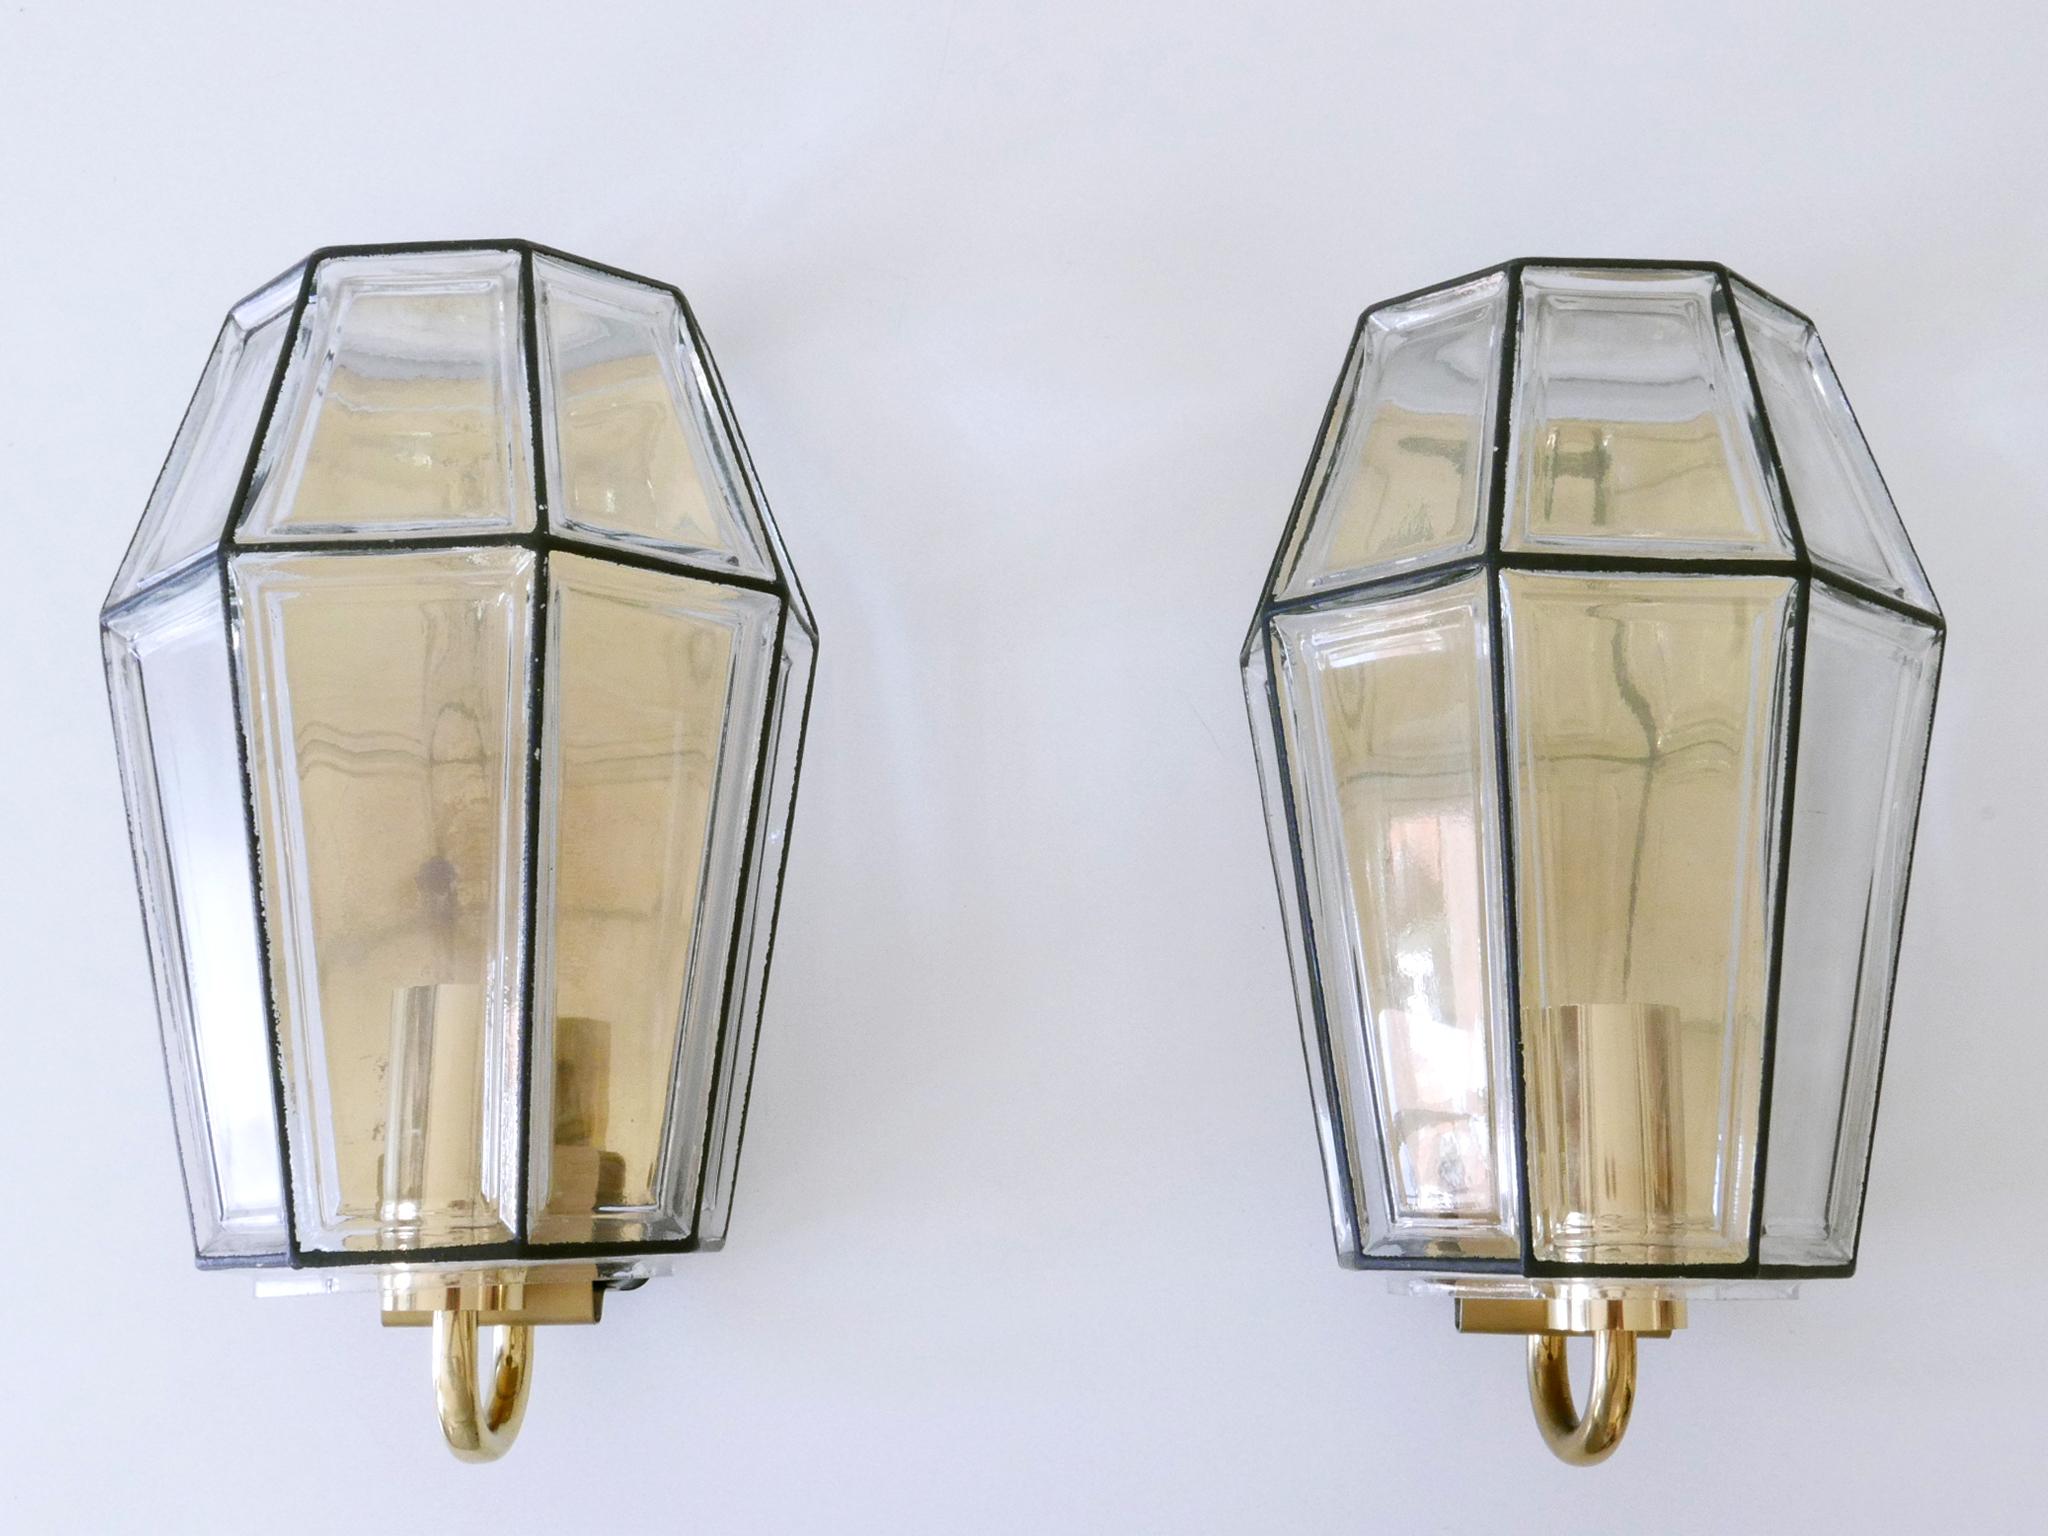 Set of Two Mid-Century Modern Sconces or Wall Fixtures by Glashütte Limburg For Sale 1